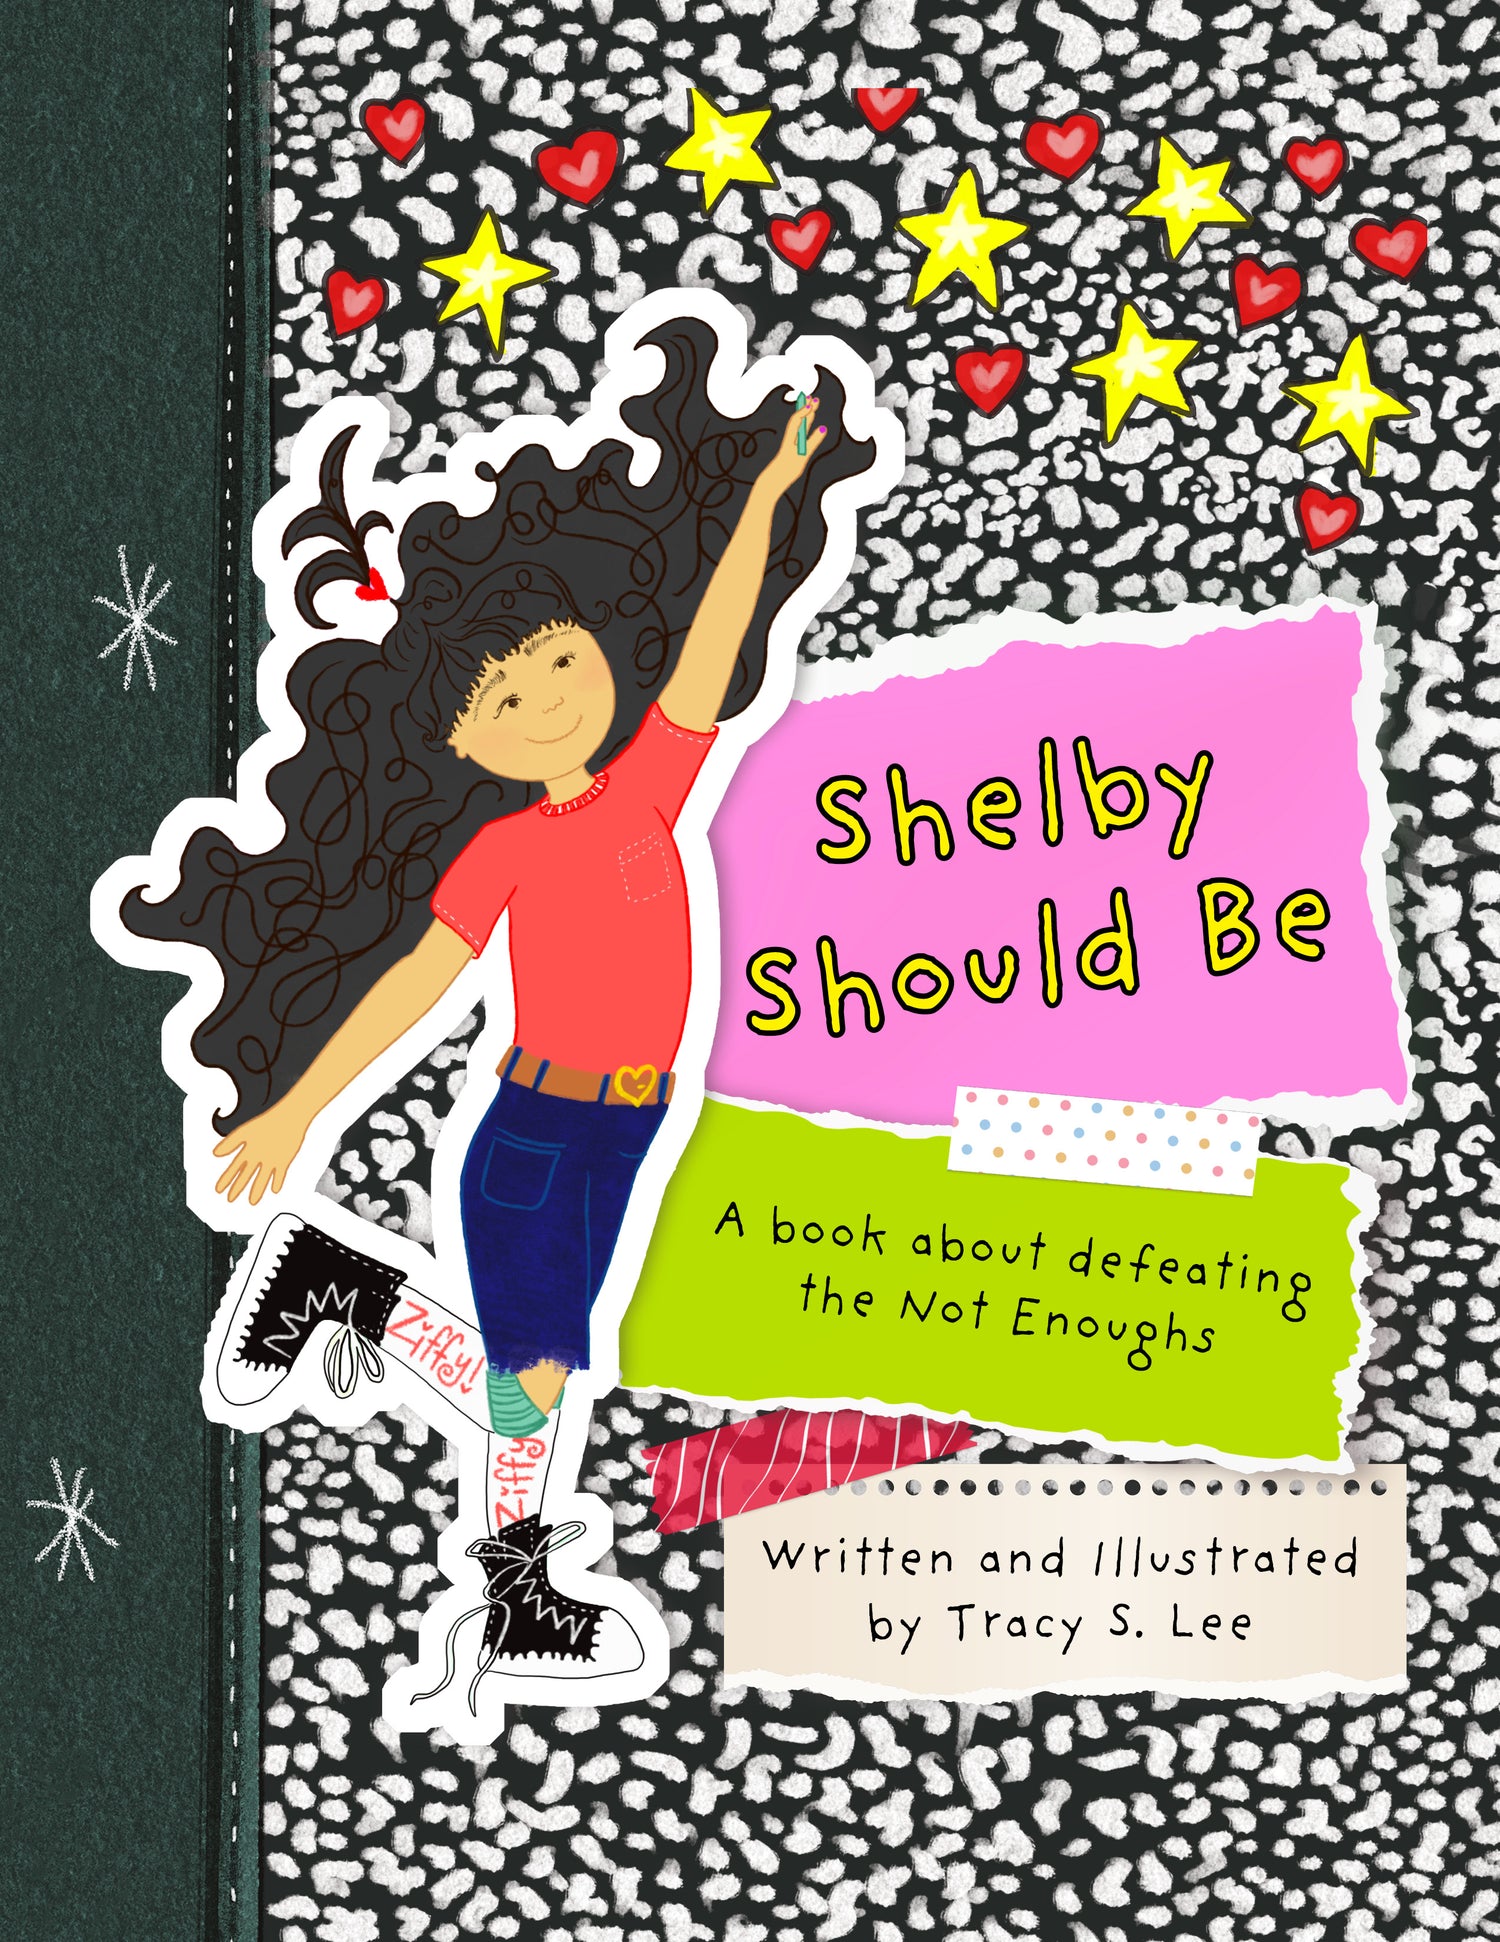 shelby-should-be-childrens-book-cover